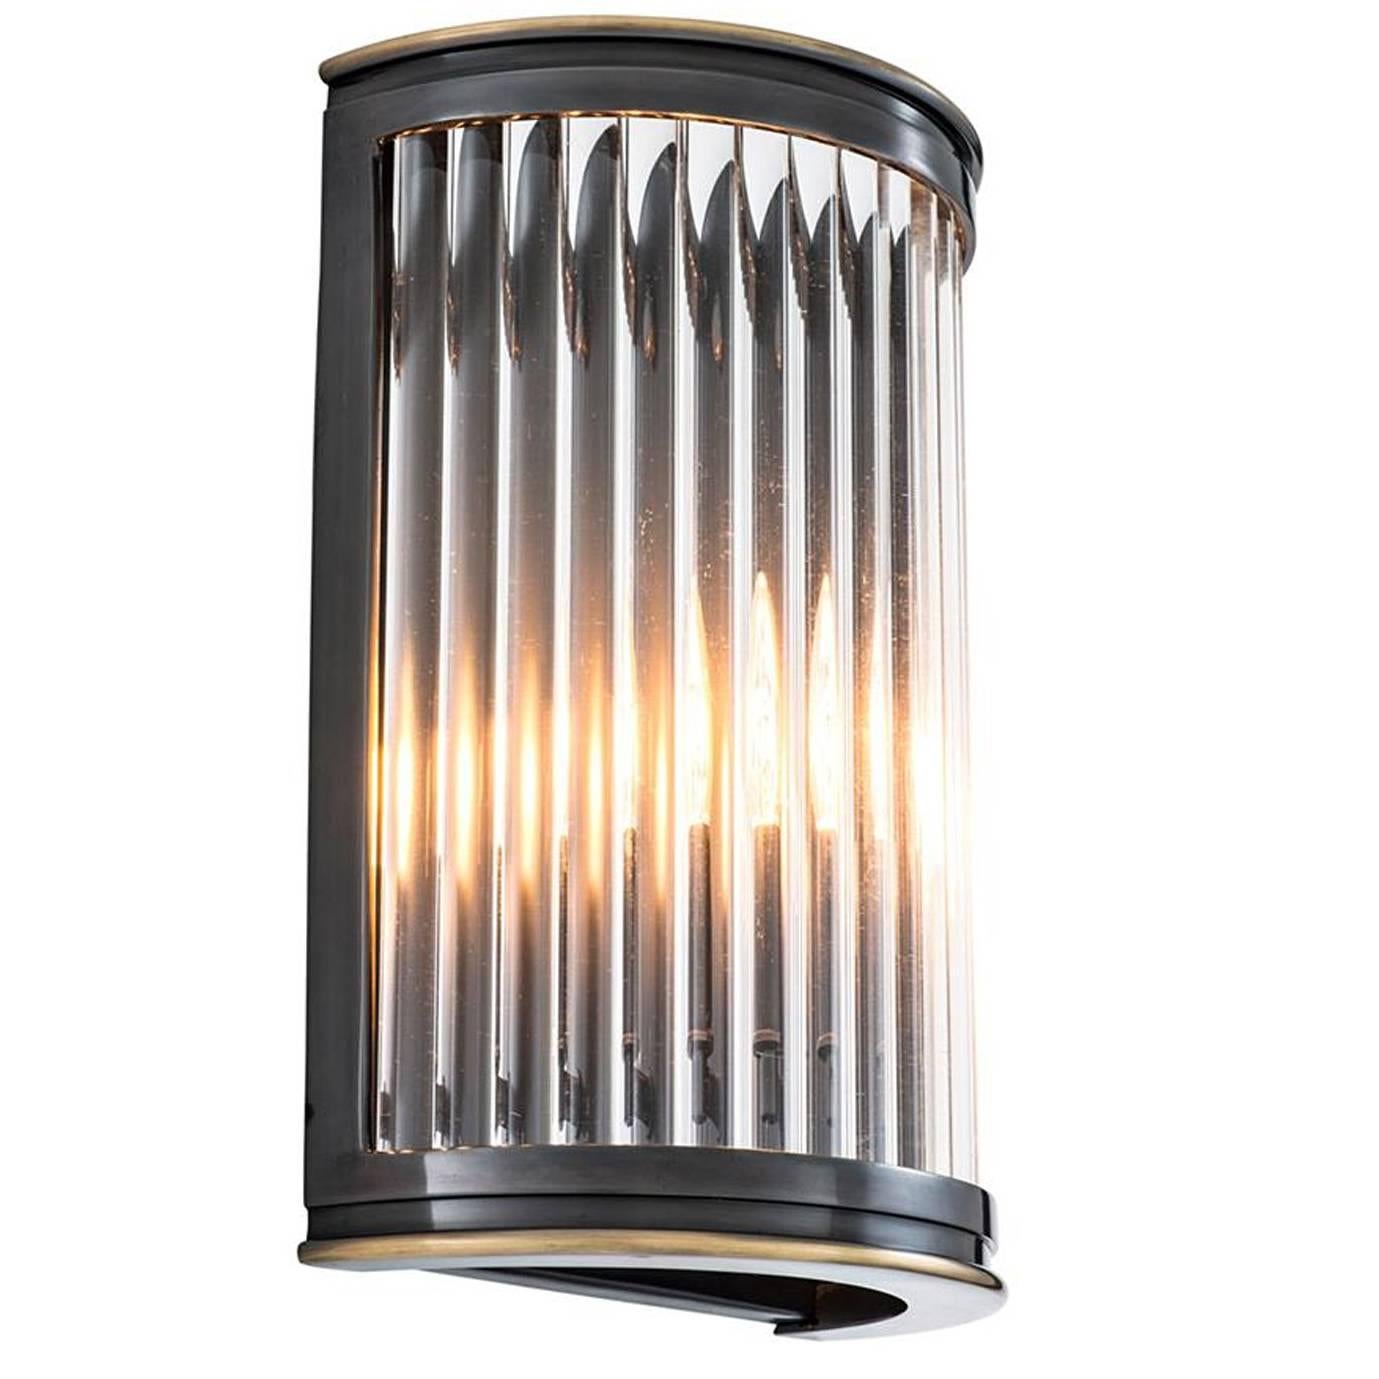 Corridor Wall Lamp in Gunmetal Finish or in Stainless Steel